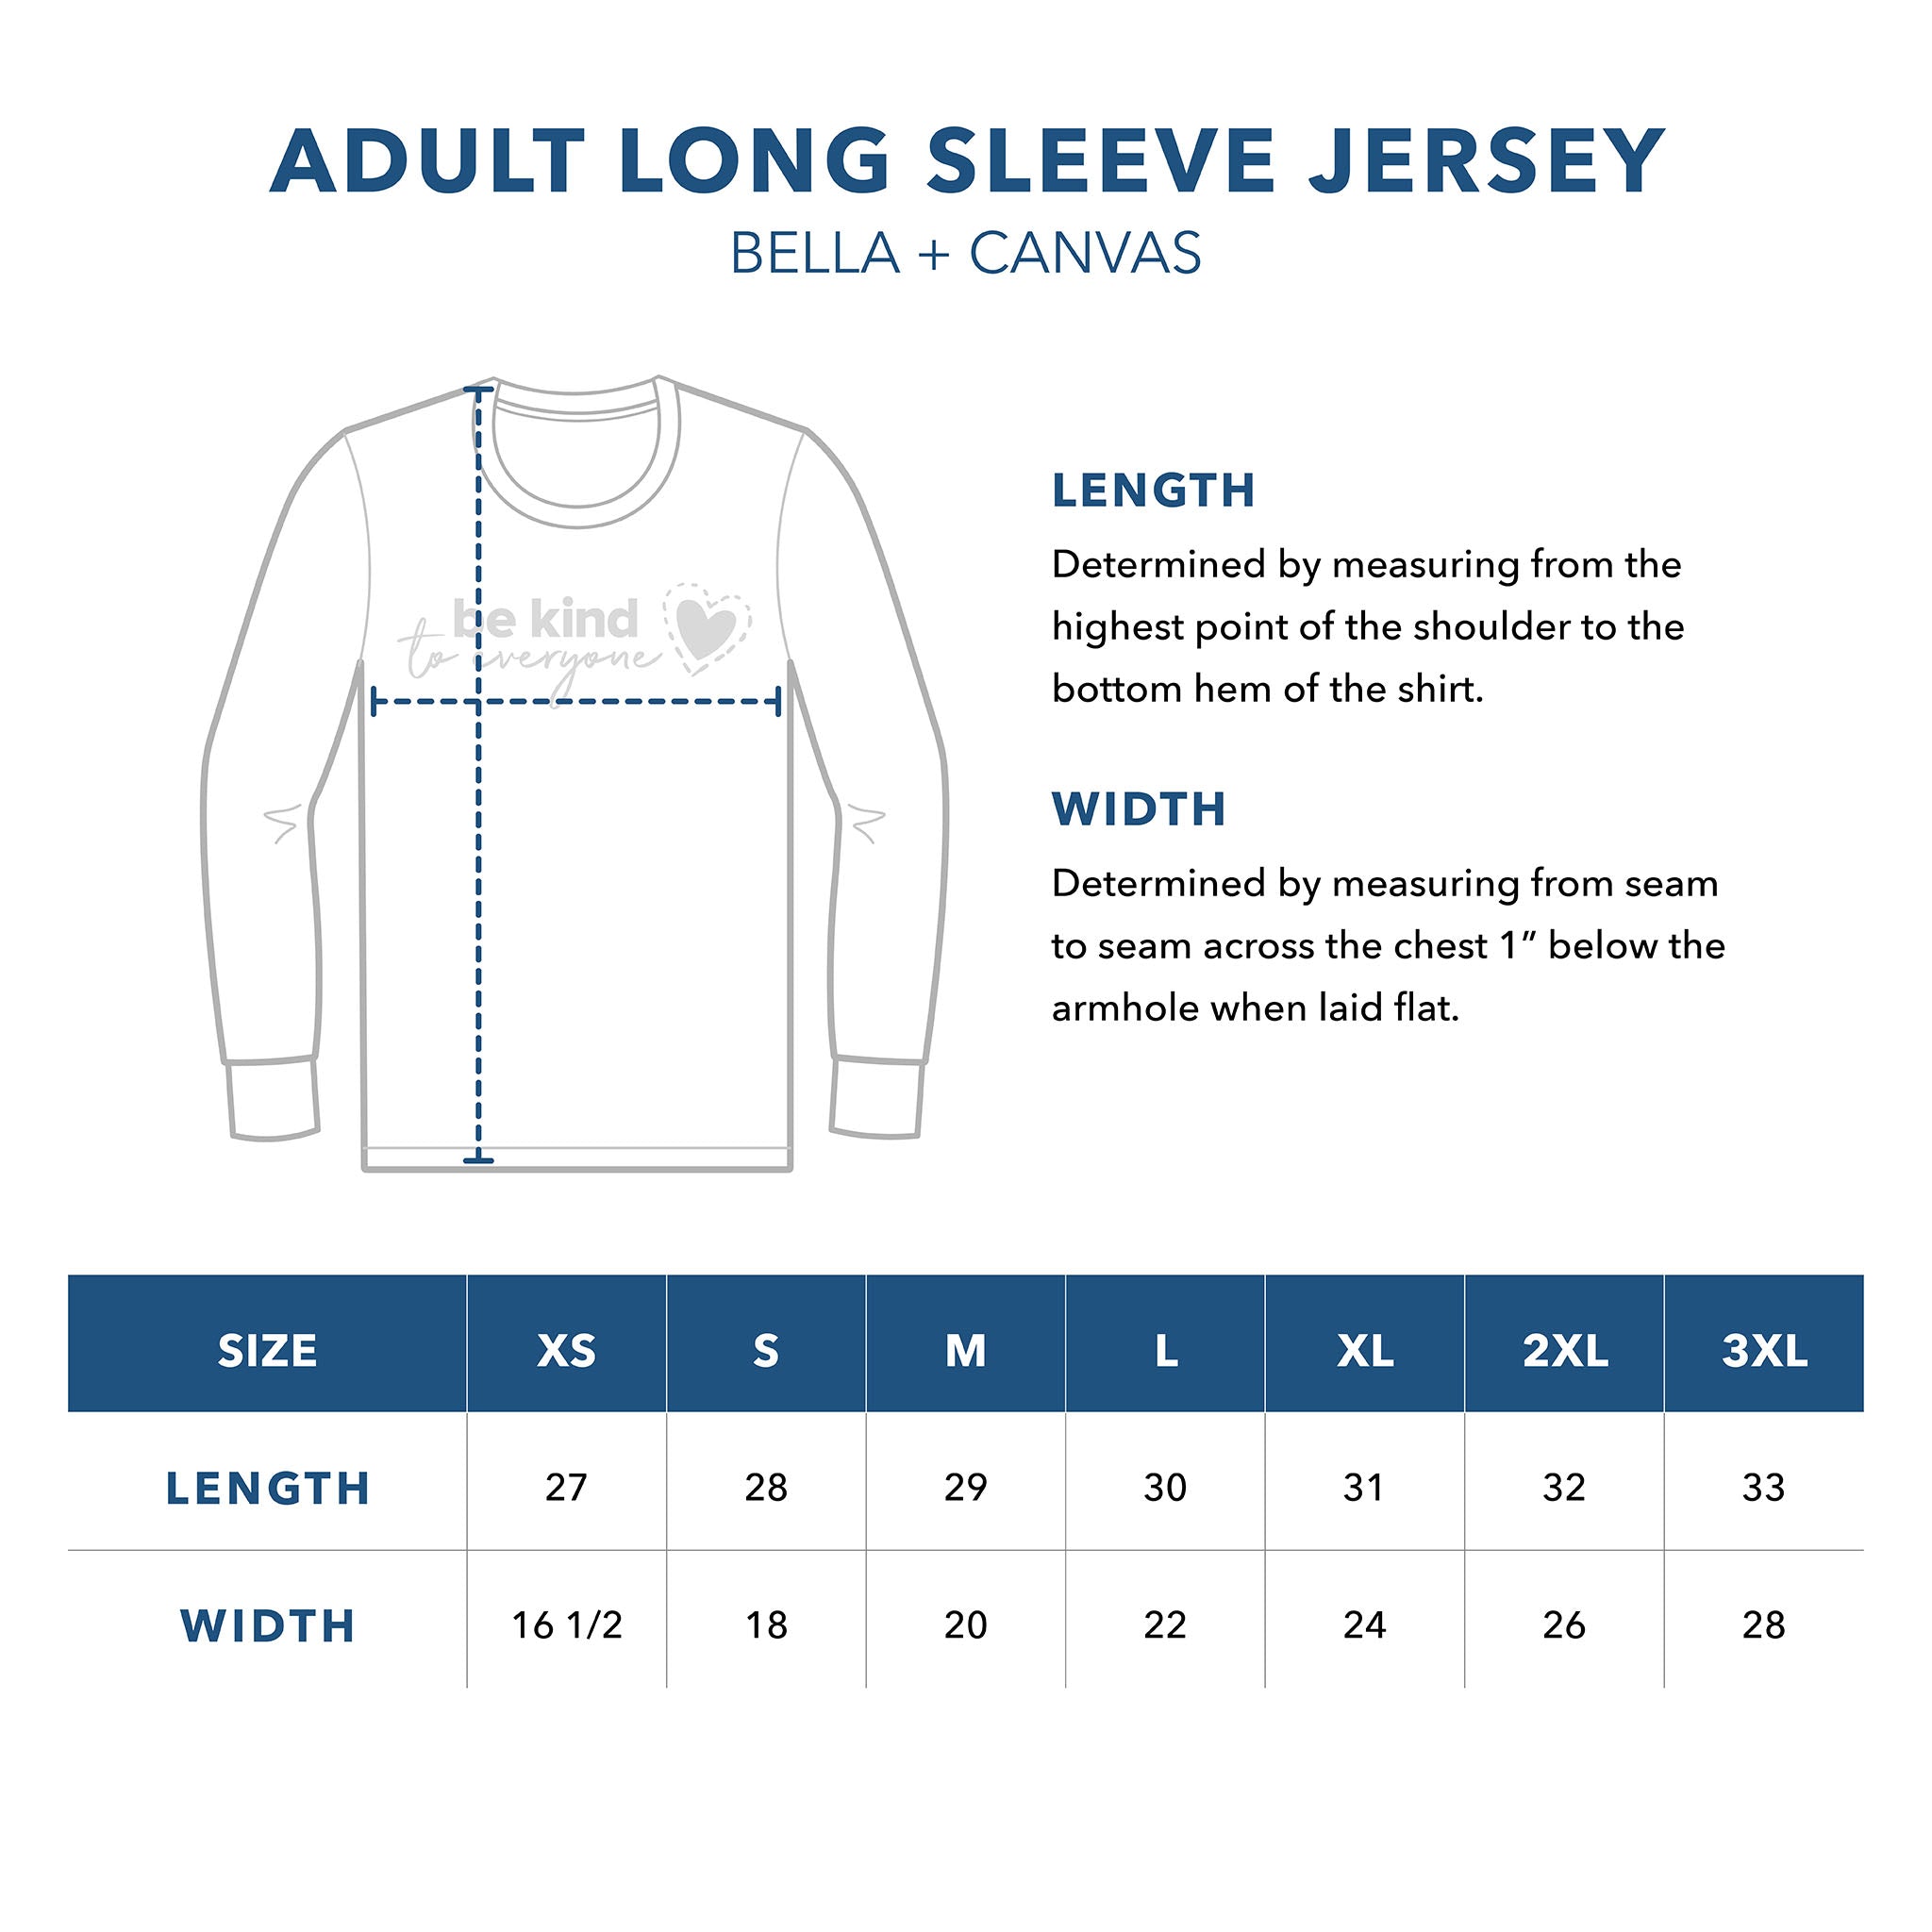 Adult Long Sleeve Jersey Sizing Guide